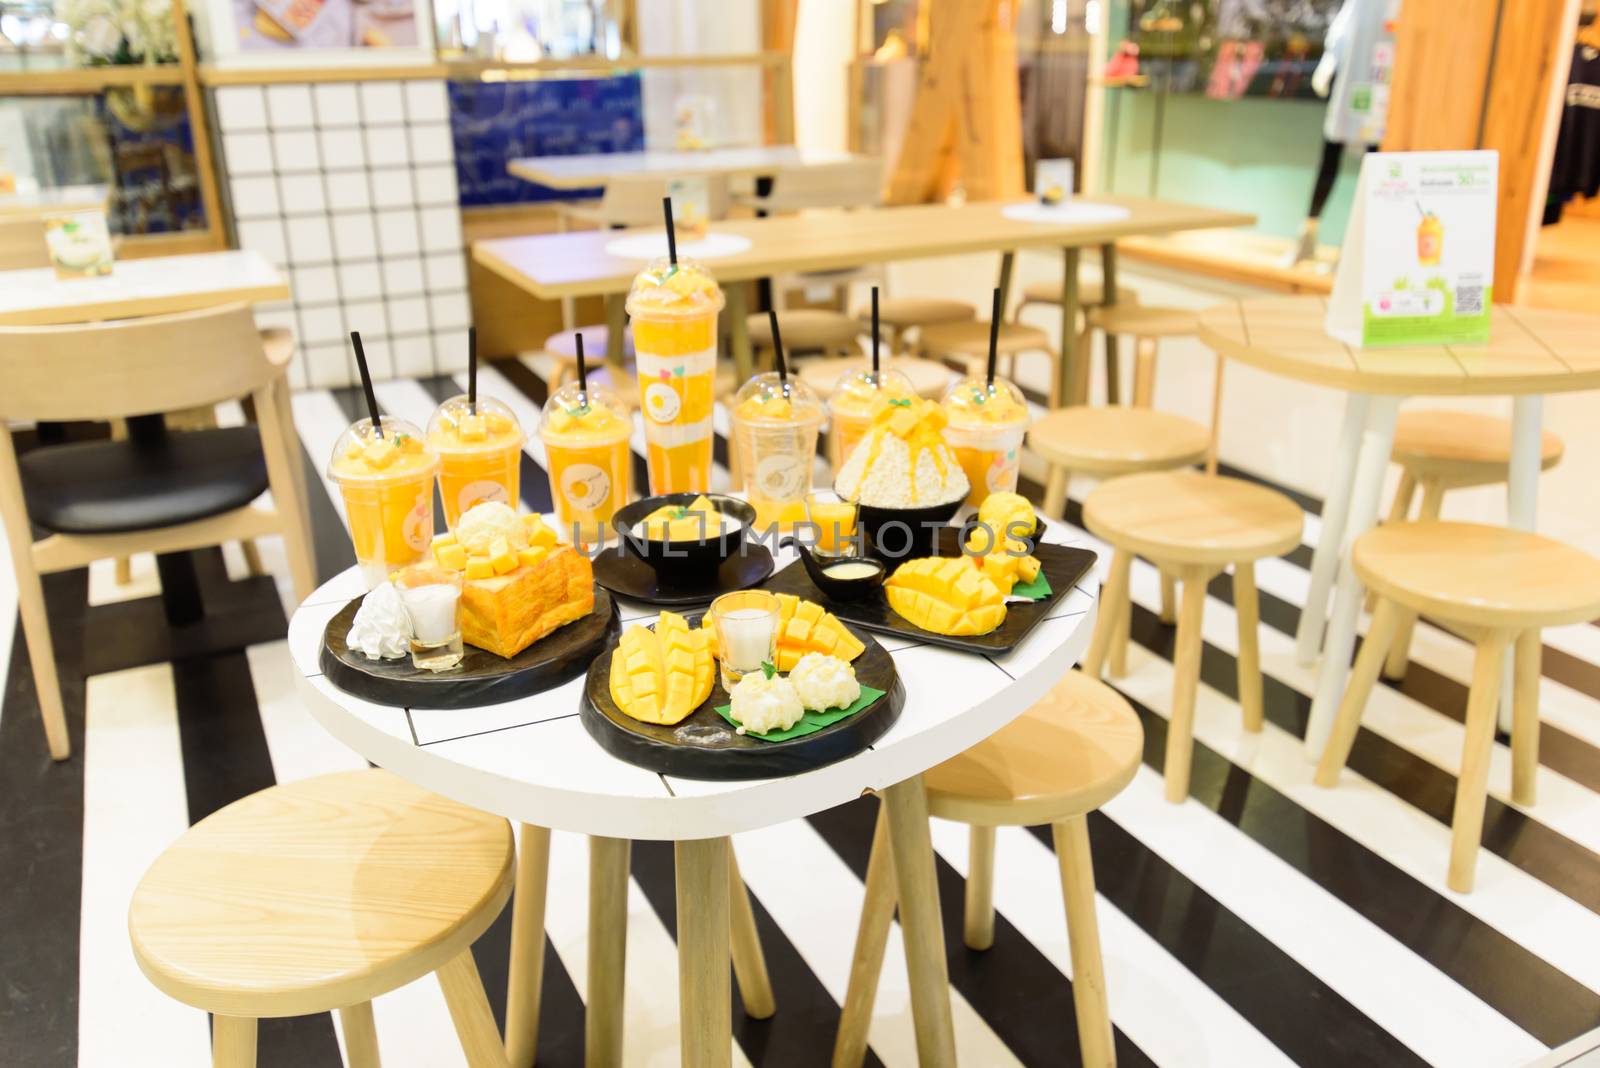 Mockup model of Mango Juice menu in the table of Make Me Mango shop in Centralworld by rukawajung